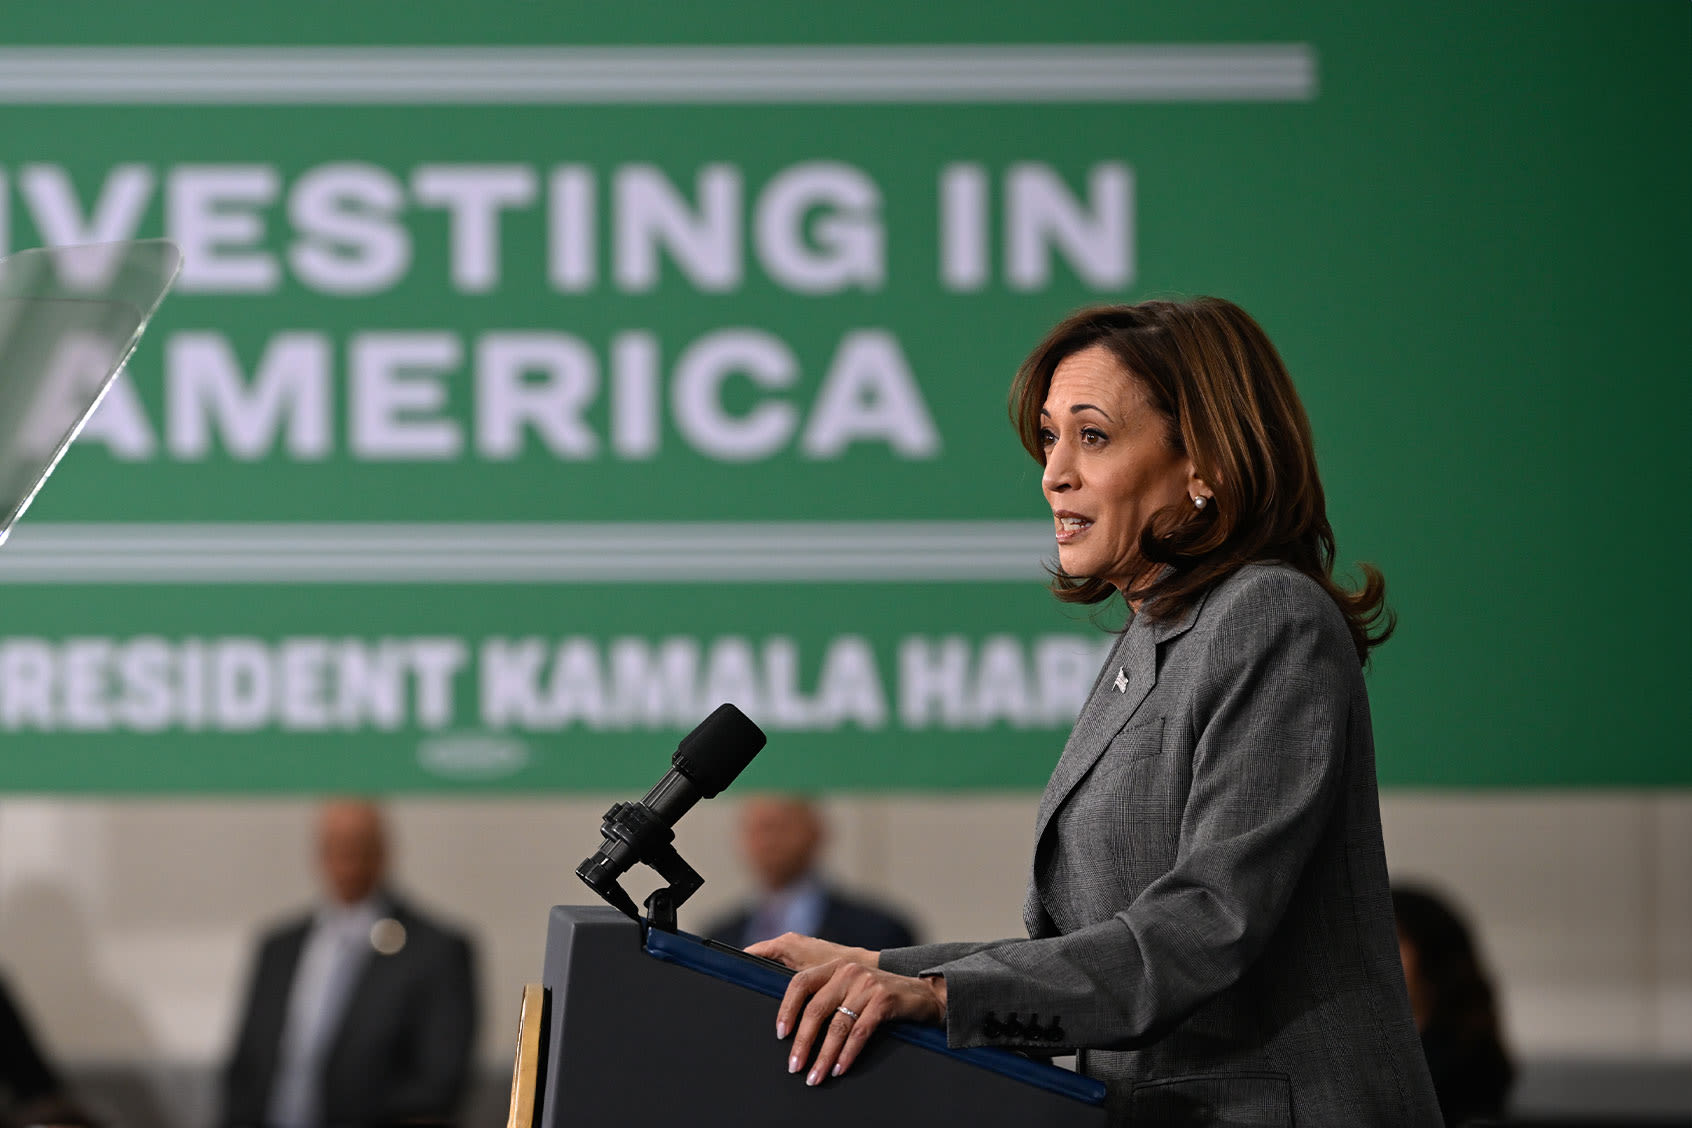 Kamala Harris will continue Biden's climate policies, say experts. But is that good enough?